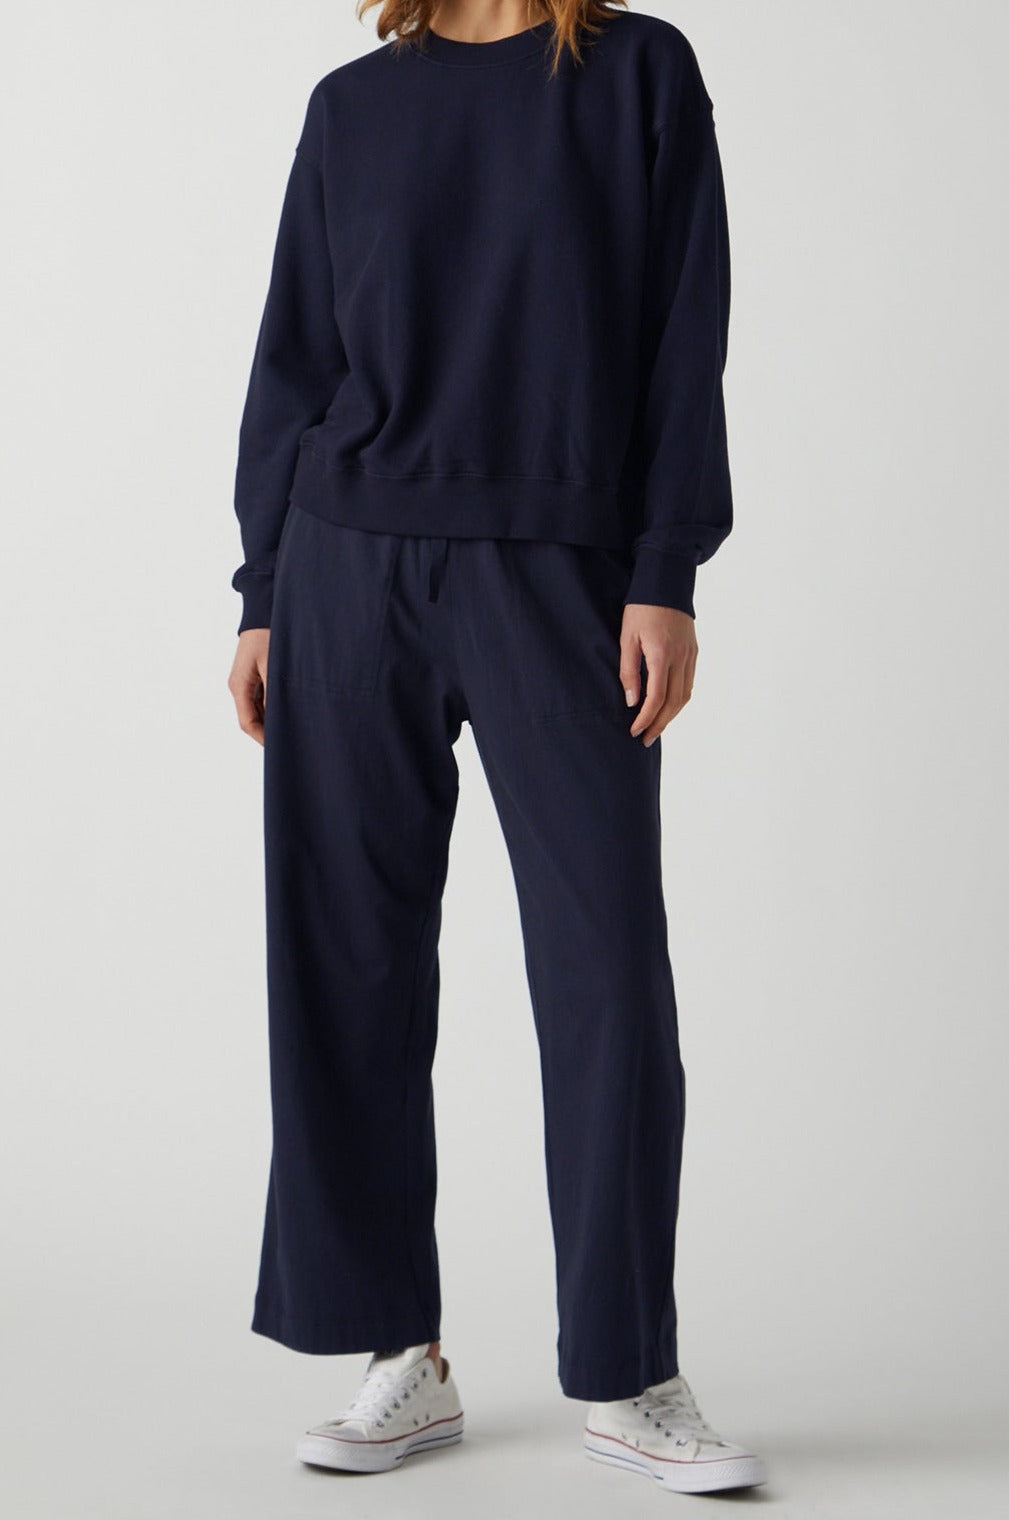   Ynez Sweatshirt in navy with Pismo Pant full length front 